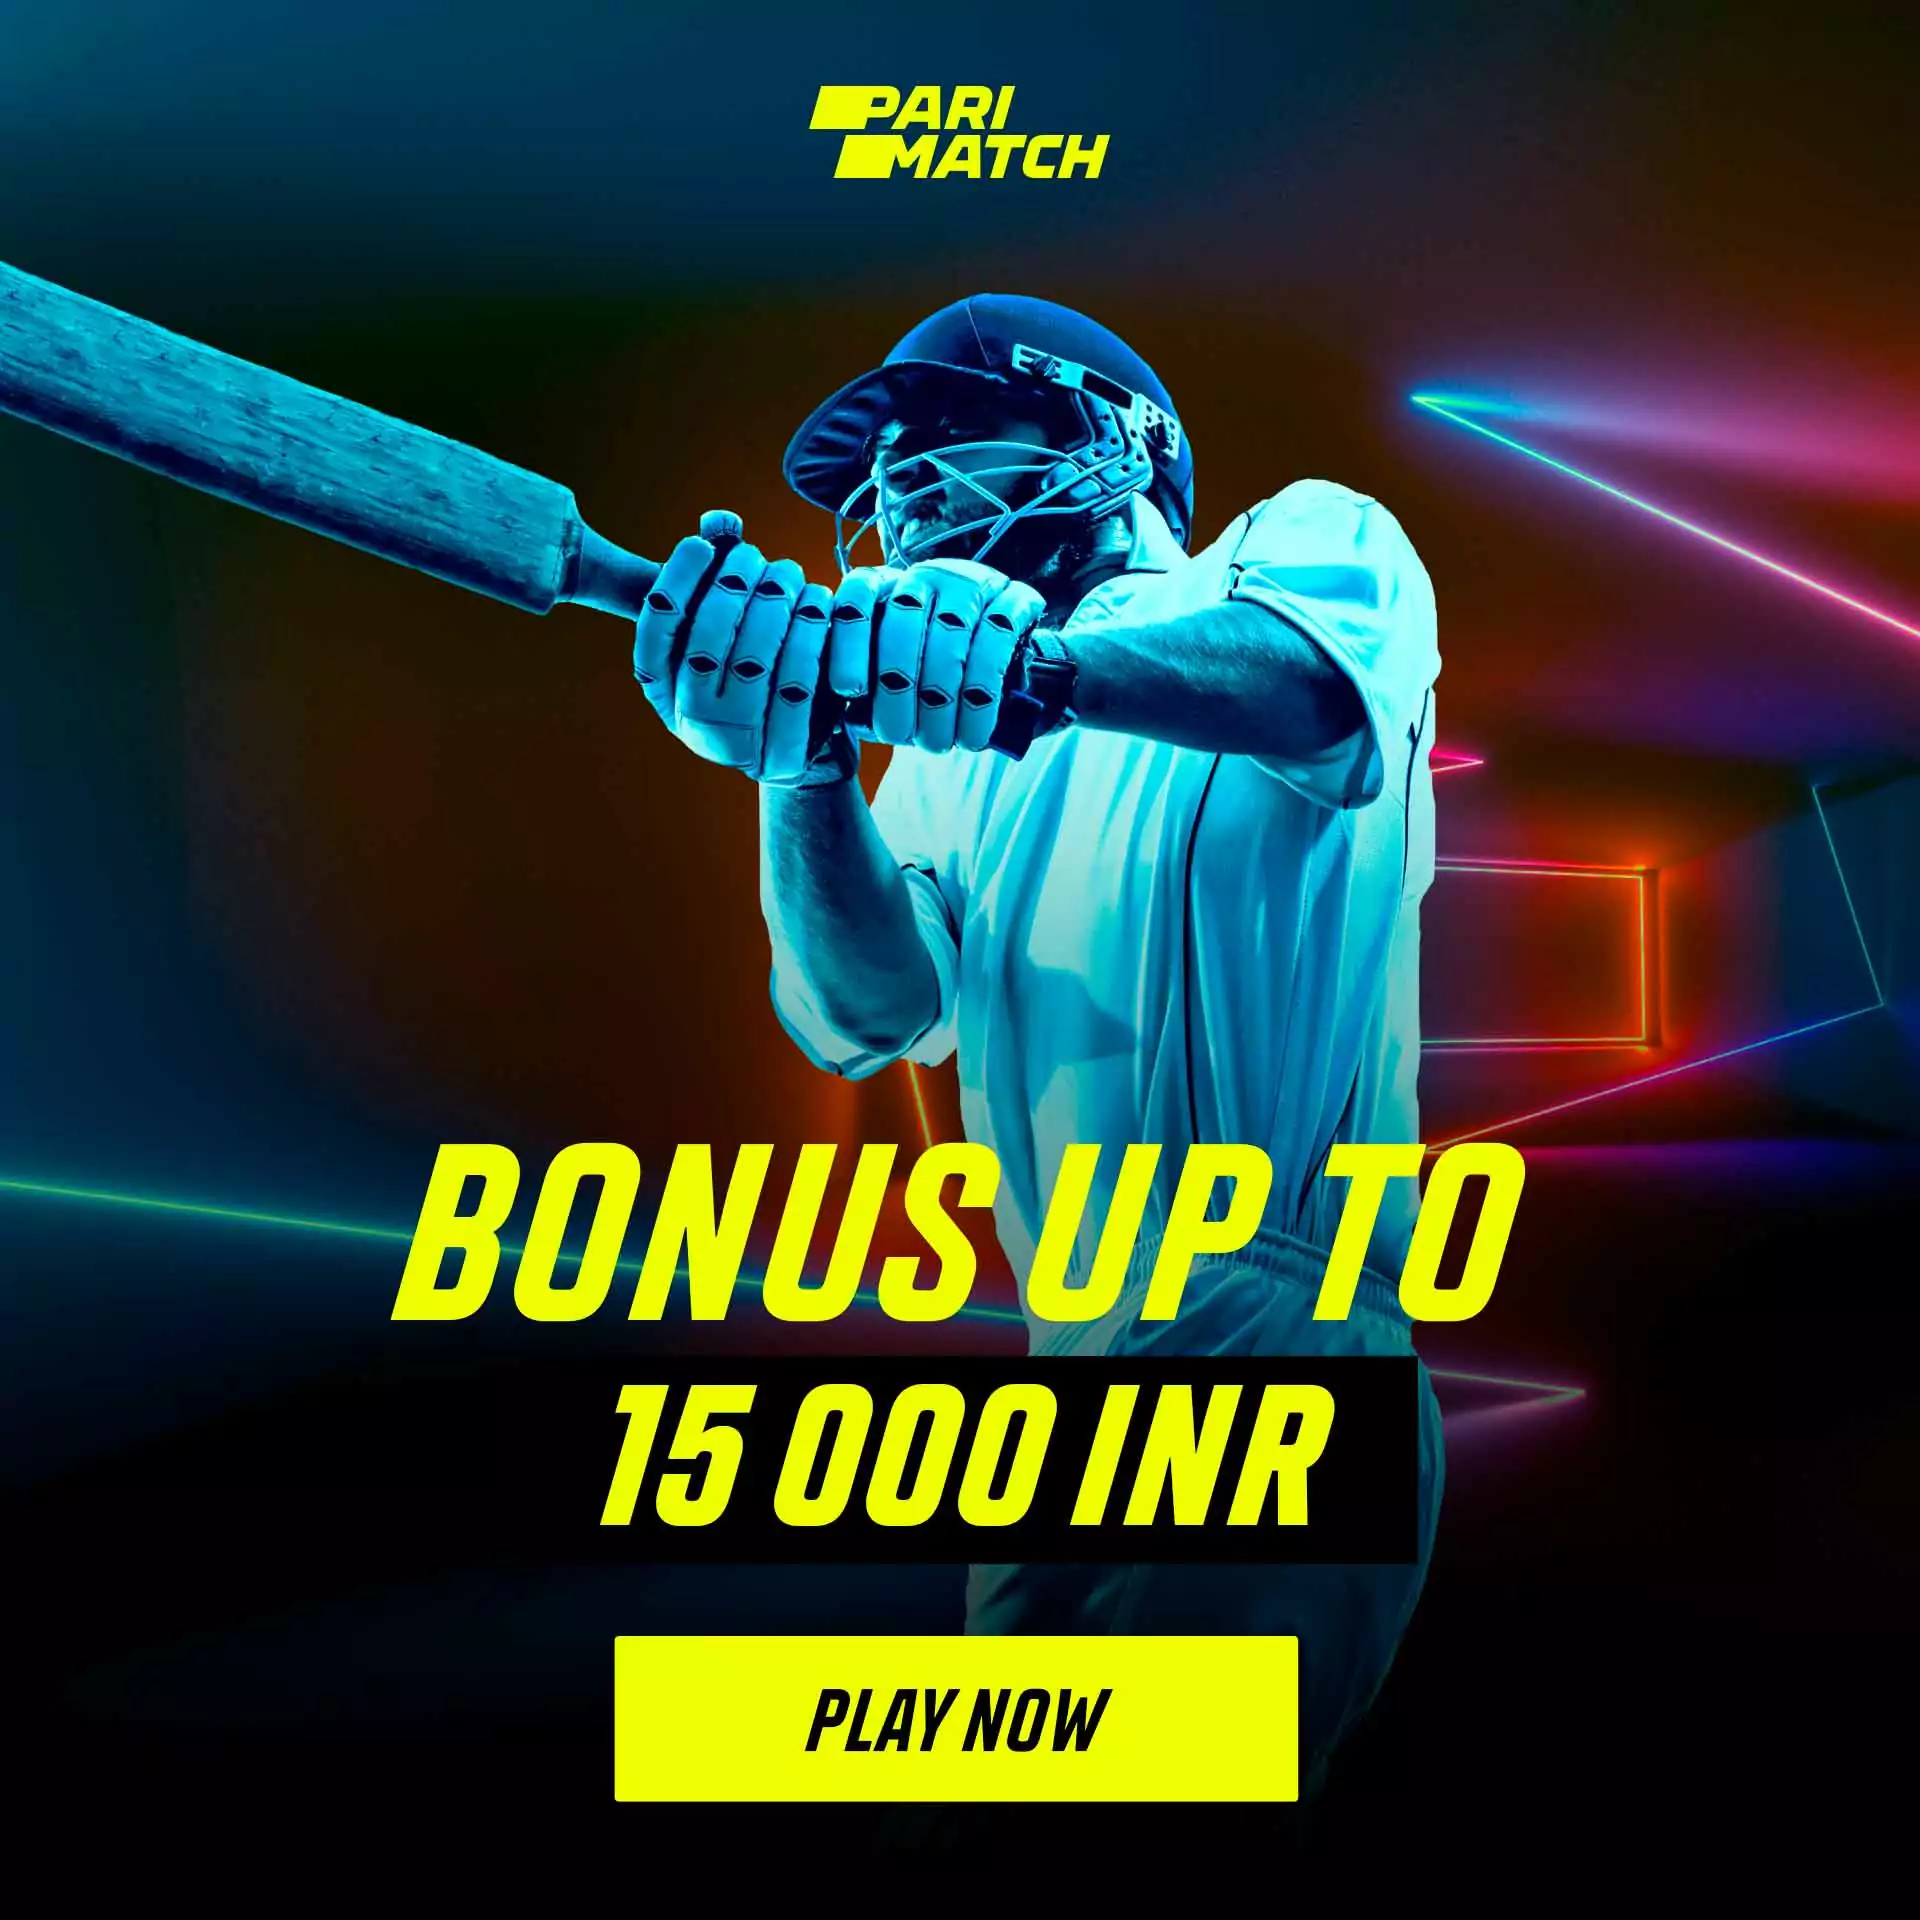 Register at the Parimatch India website and get your bonuses for more efficient cricket betting.